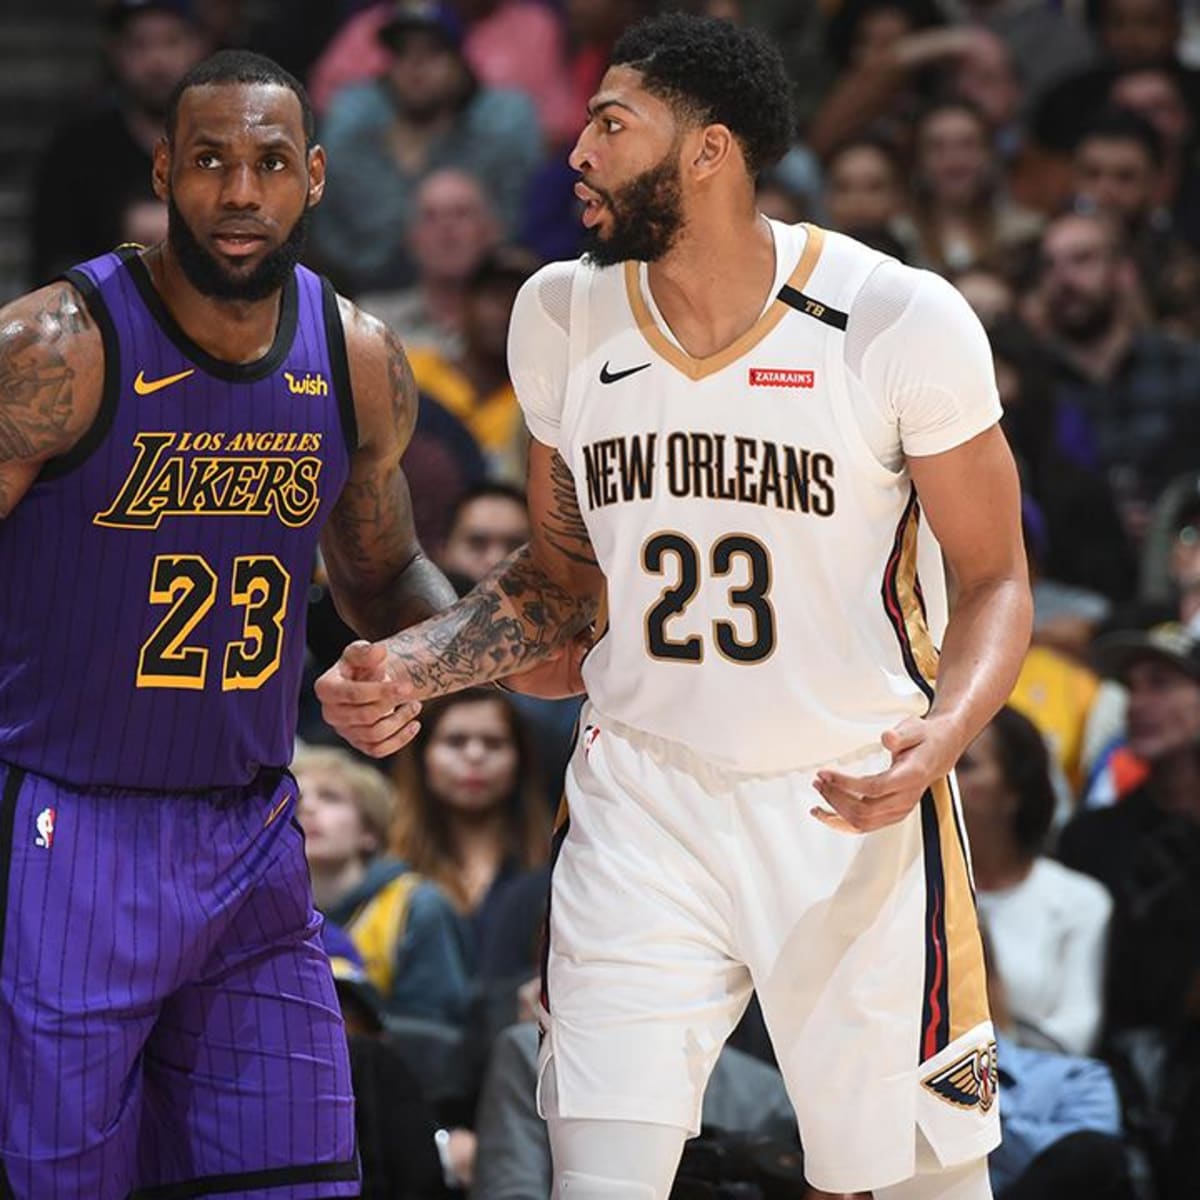 Lakers' LeBron James hints at new number after gifting No. 23 to